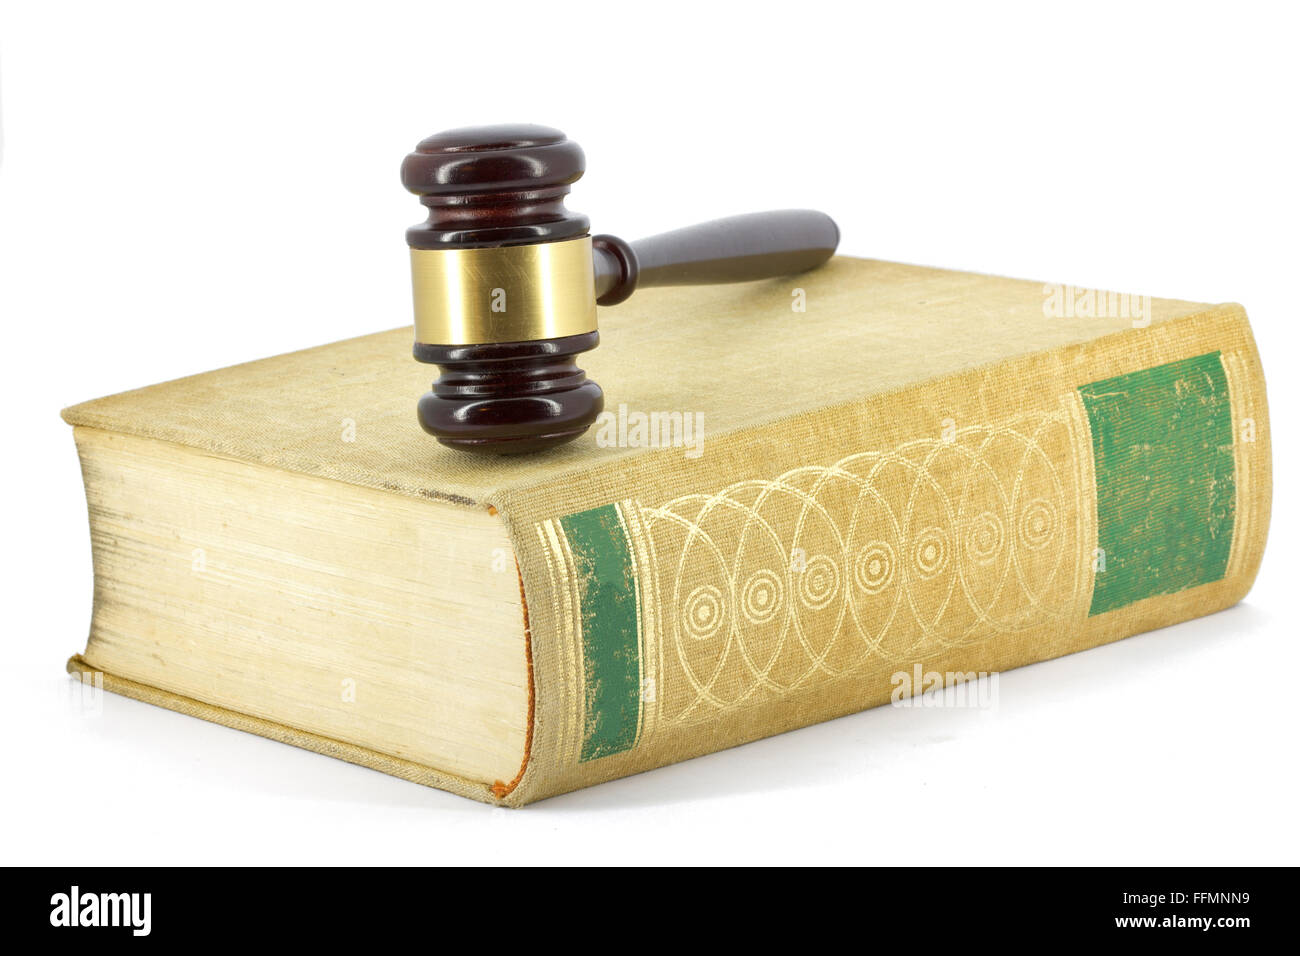 Law book and gavel Banque D'Images